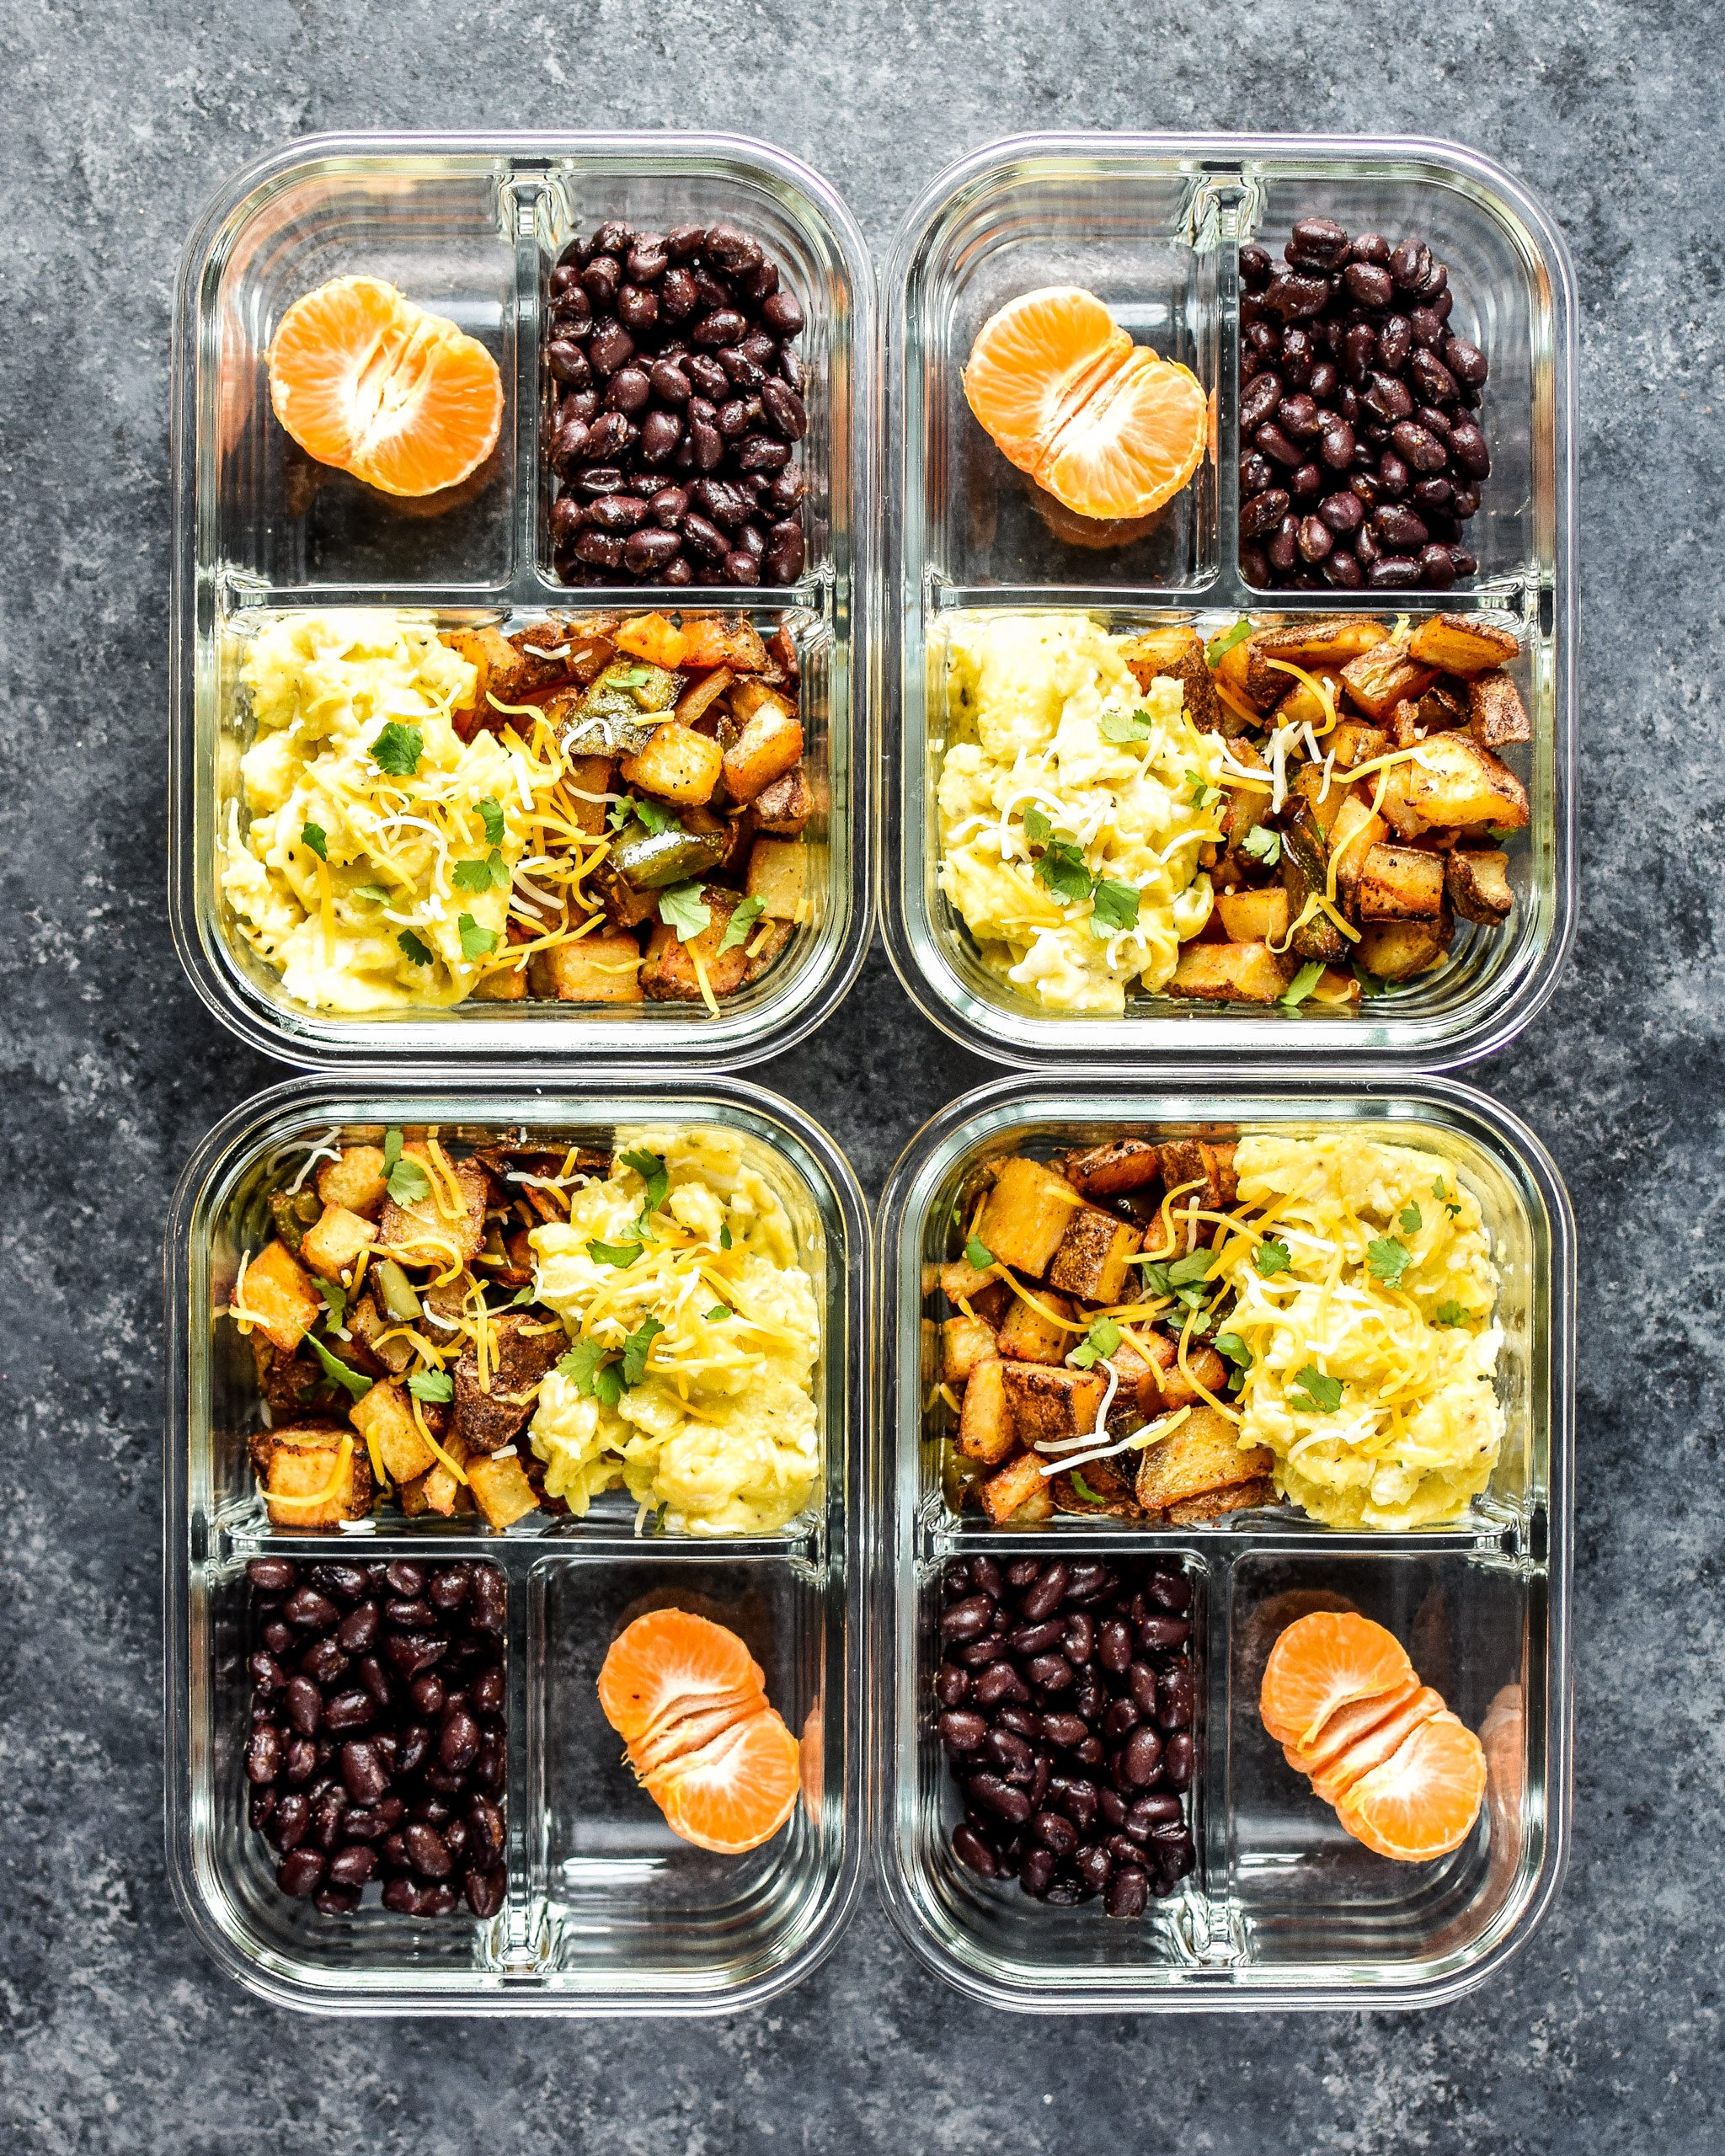 Four meal prepped servings of breakfasts with potatoes, eggs, peppers and beans.